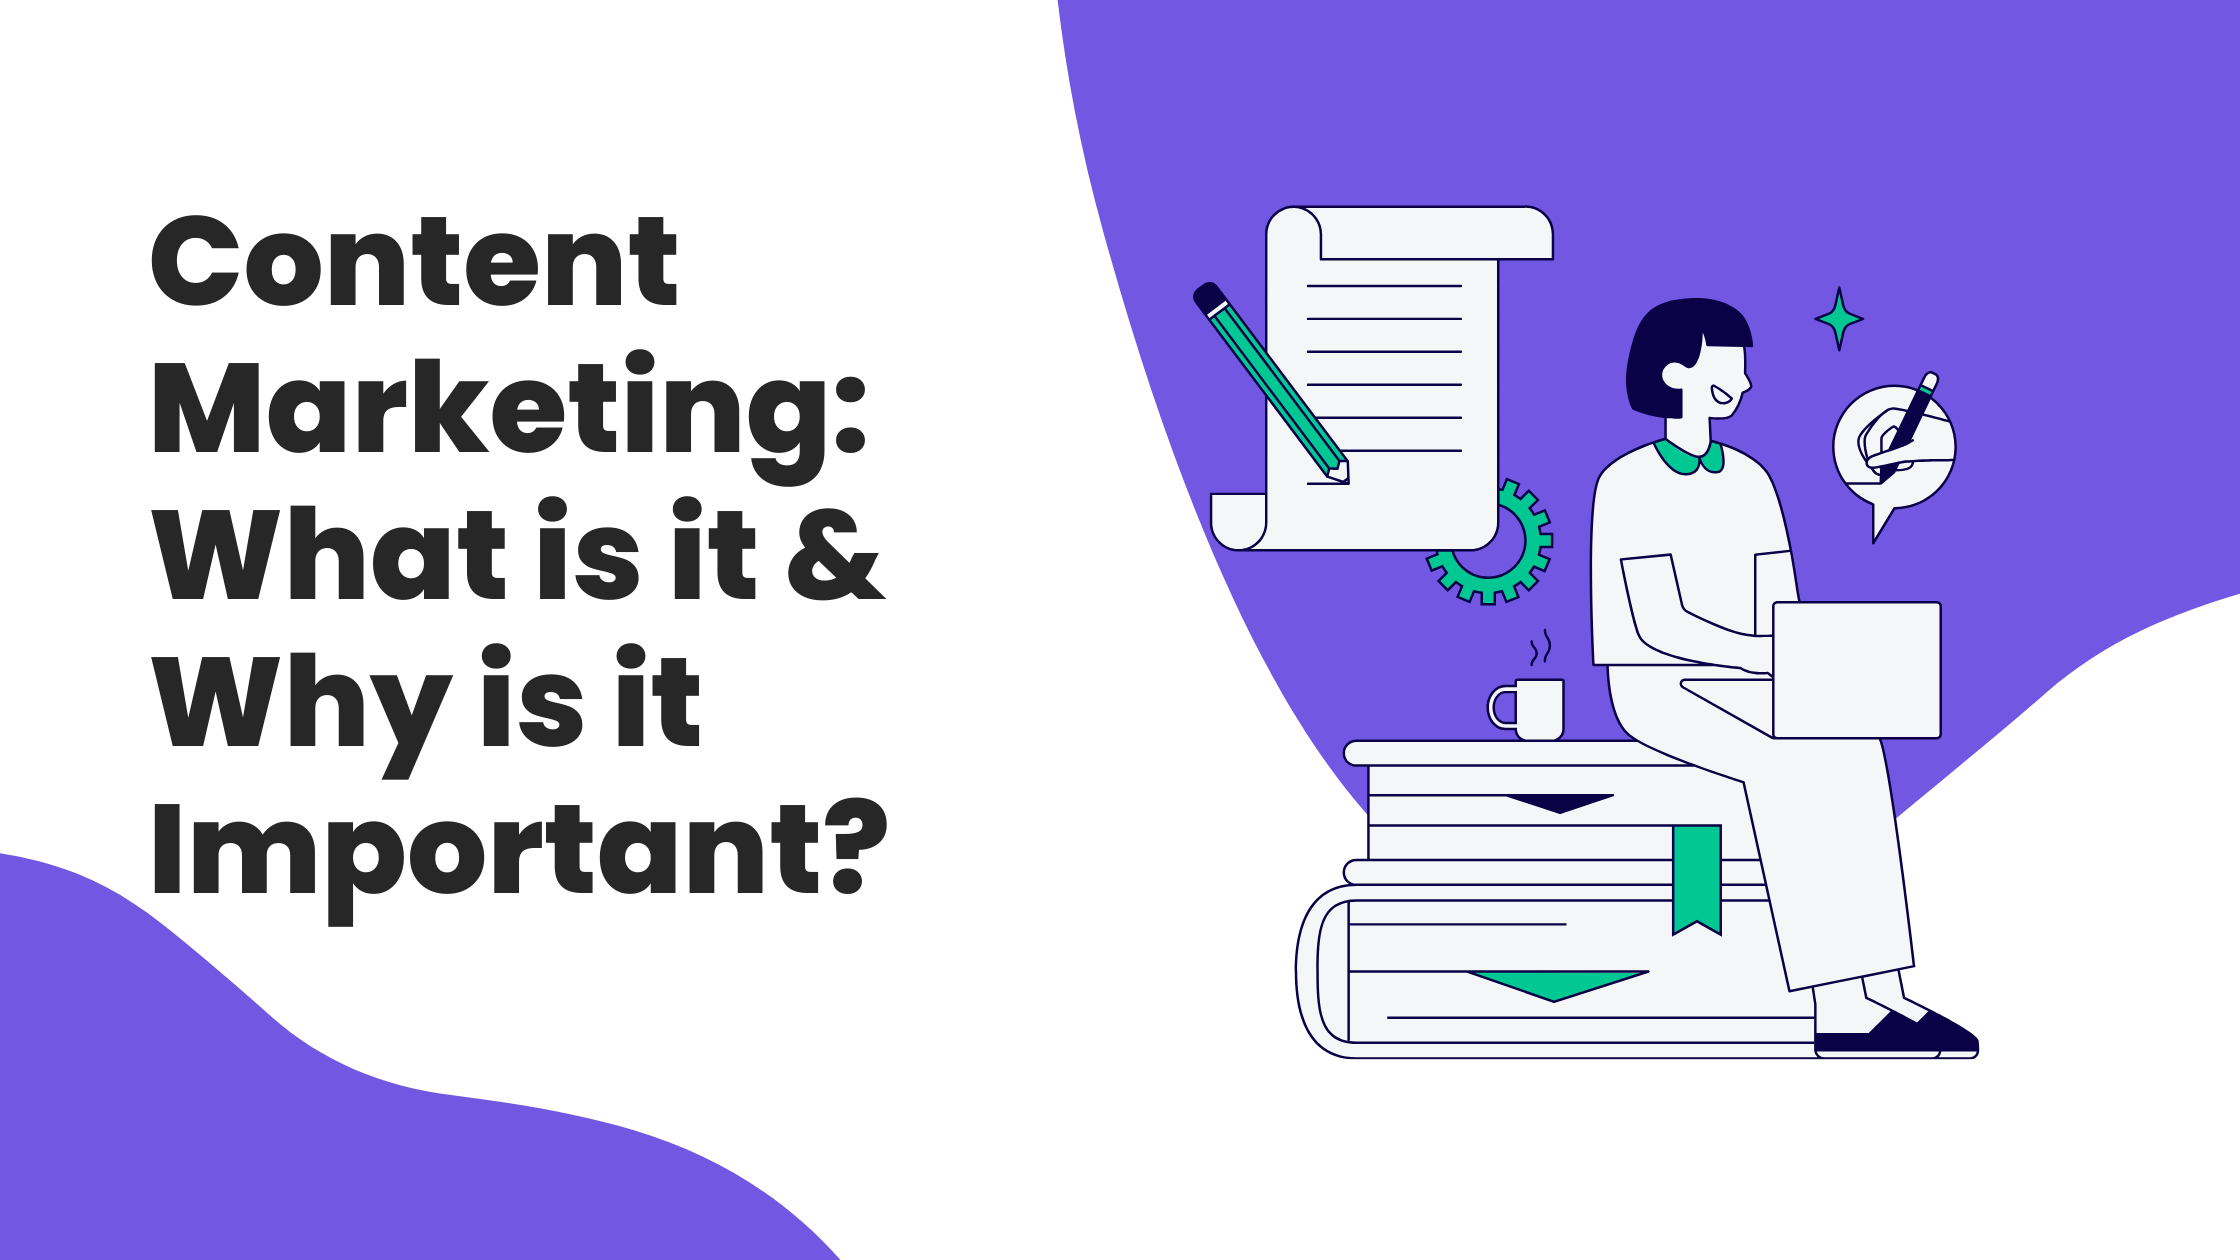 Content Marketing: What is it & Why is it Important?